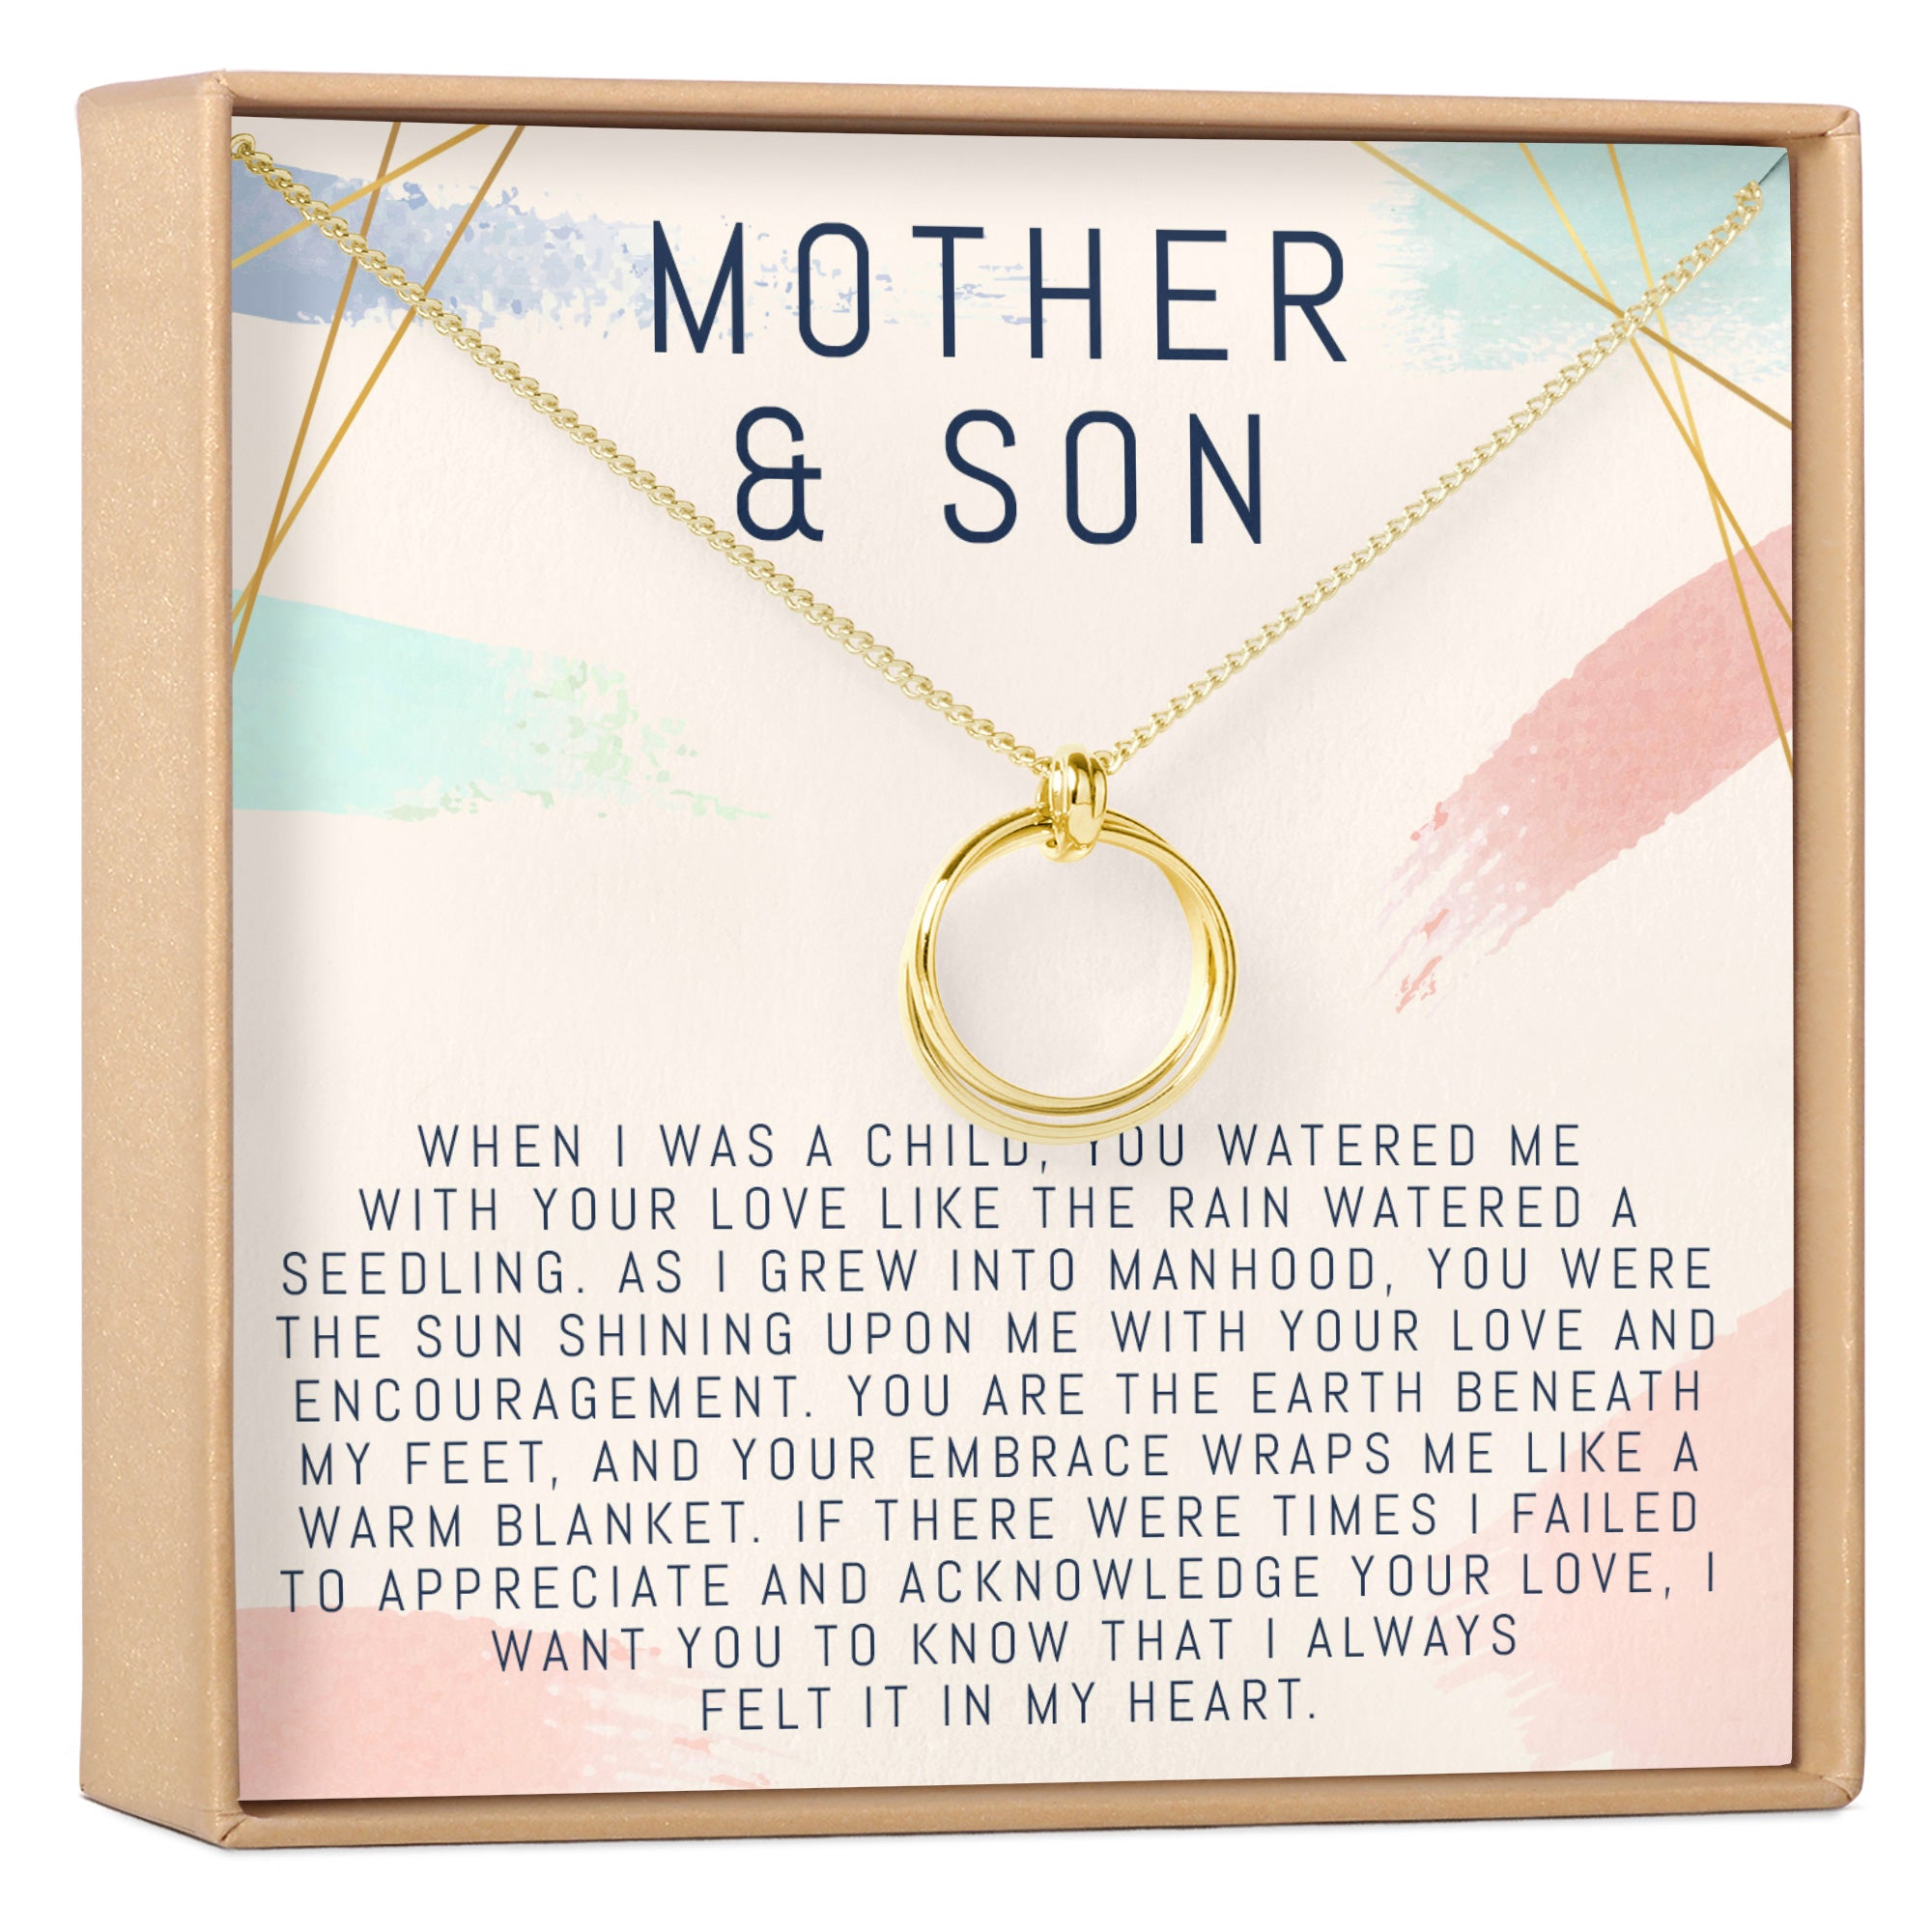 A Bond Between a Mother and Her Child is Forever Mother/'s Necklace. Mother Daughter or Mother Son Two Circles Necklace Gift For Mom